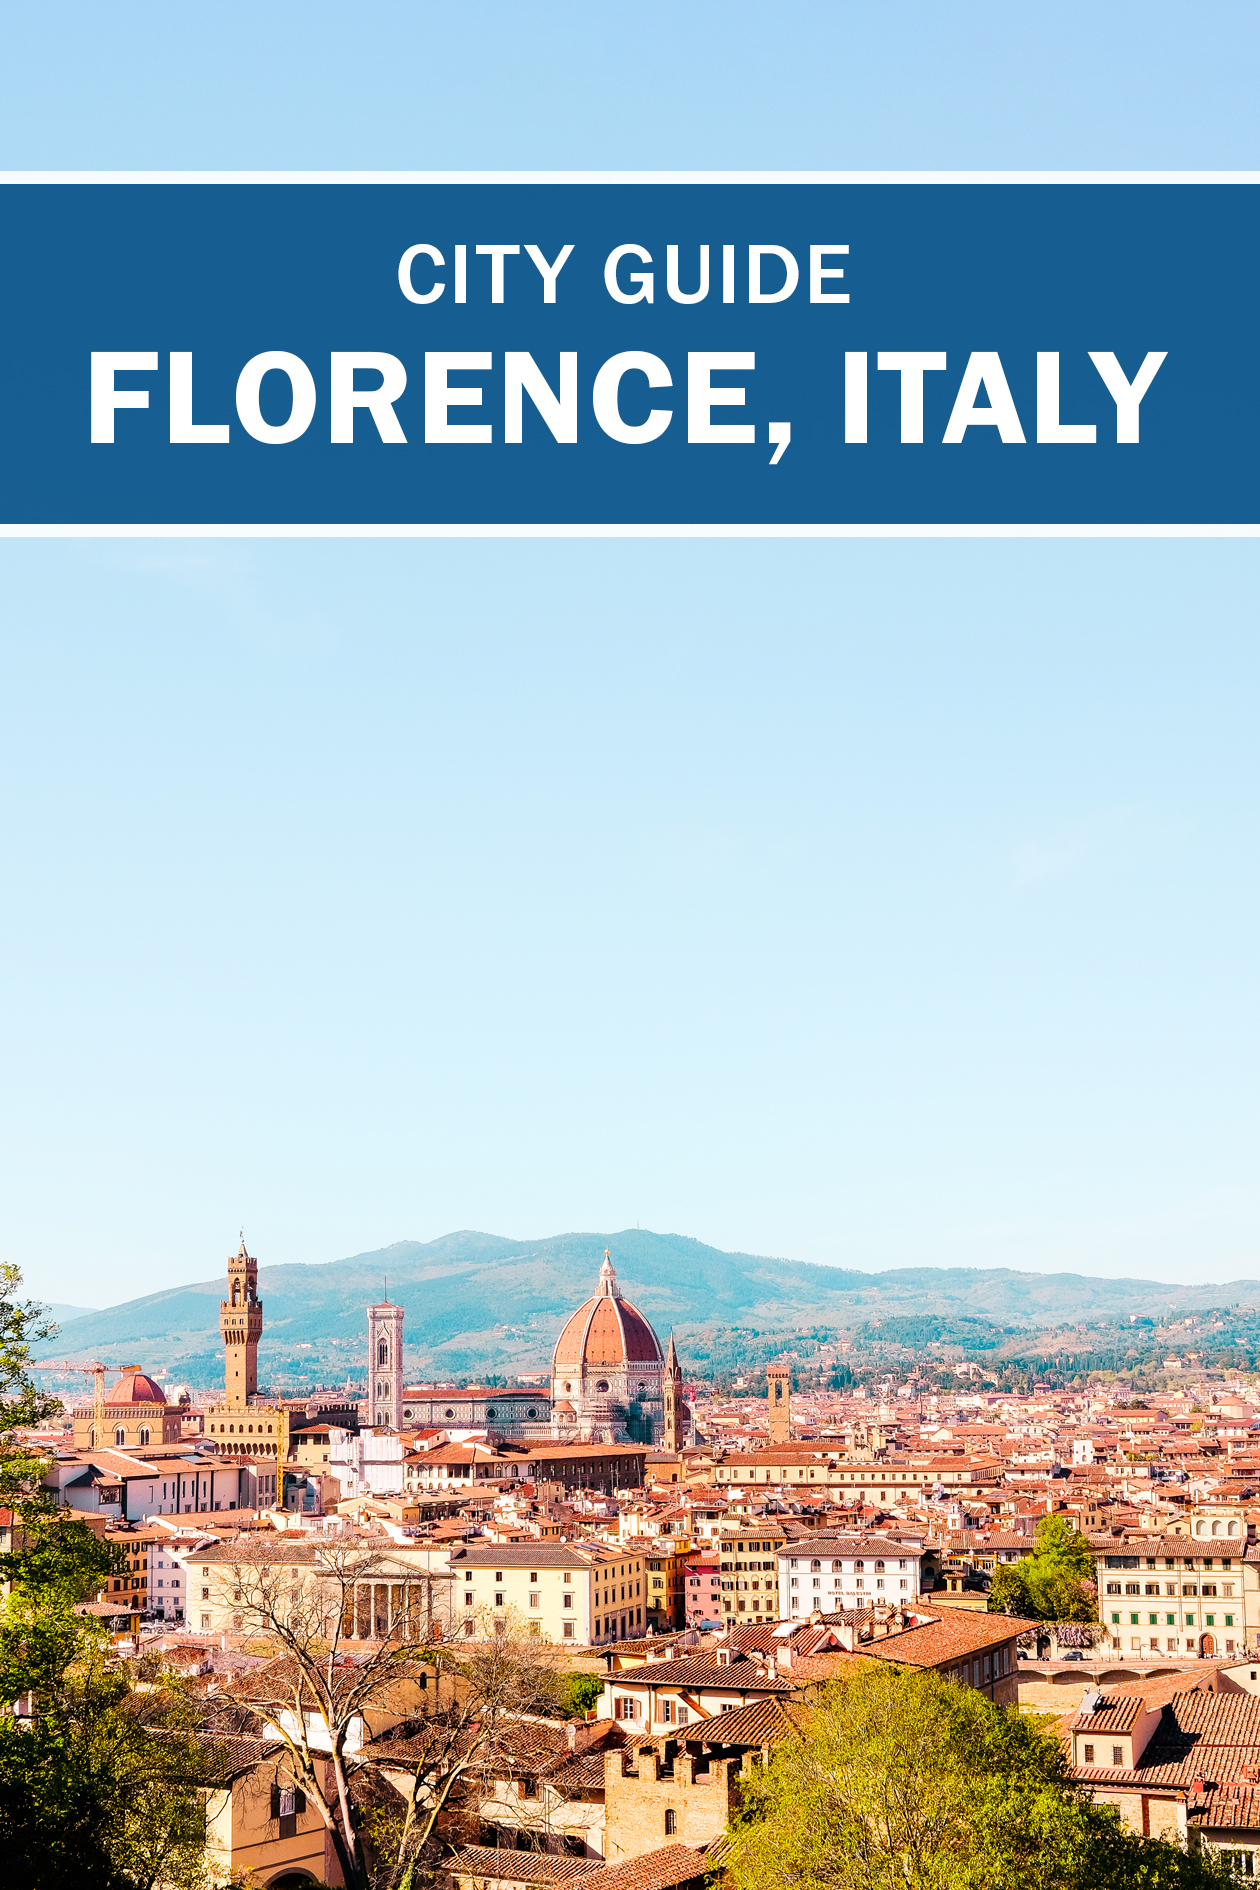 City Guide: What To Do in Florence, Italy